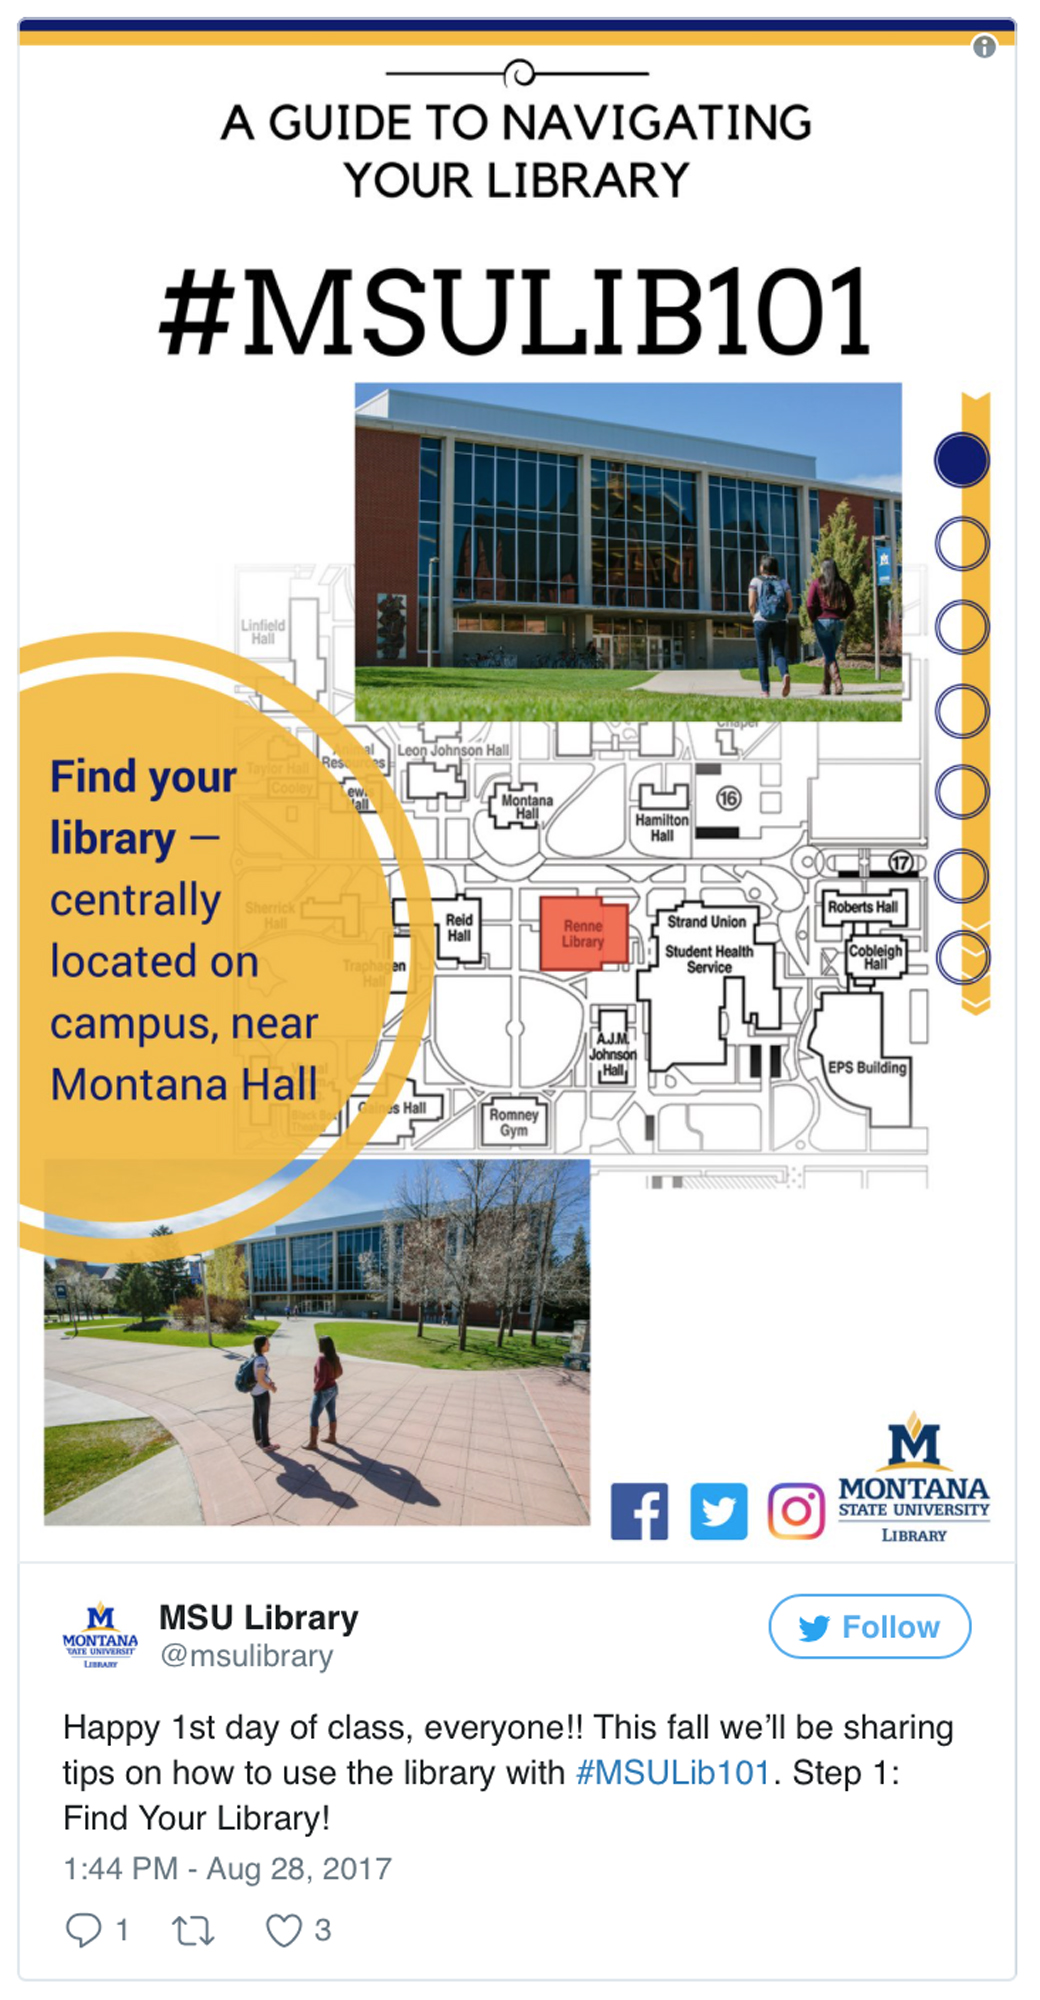 Figure 12. A Twitter post from Montana State University Library, showing the #MSULib101 social media campaign connected to the UXUP poster series.